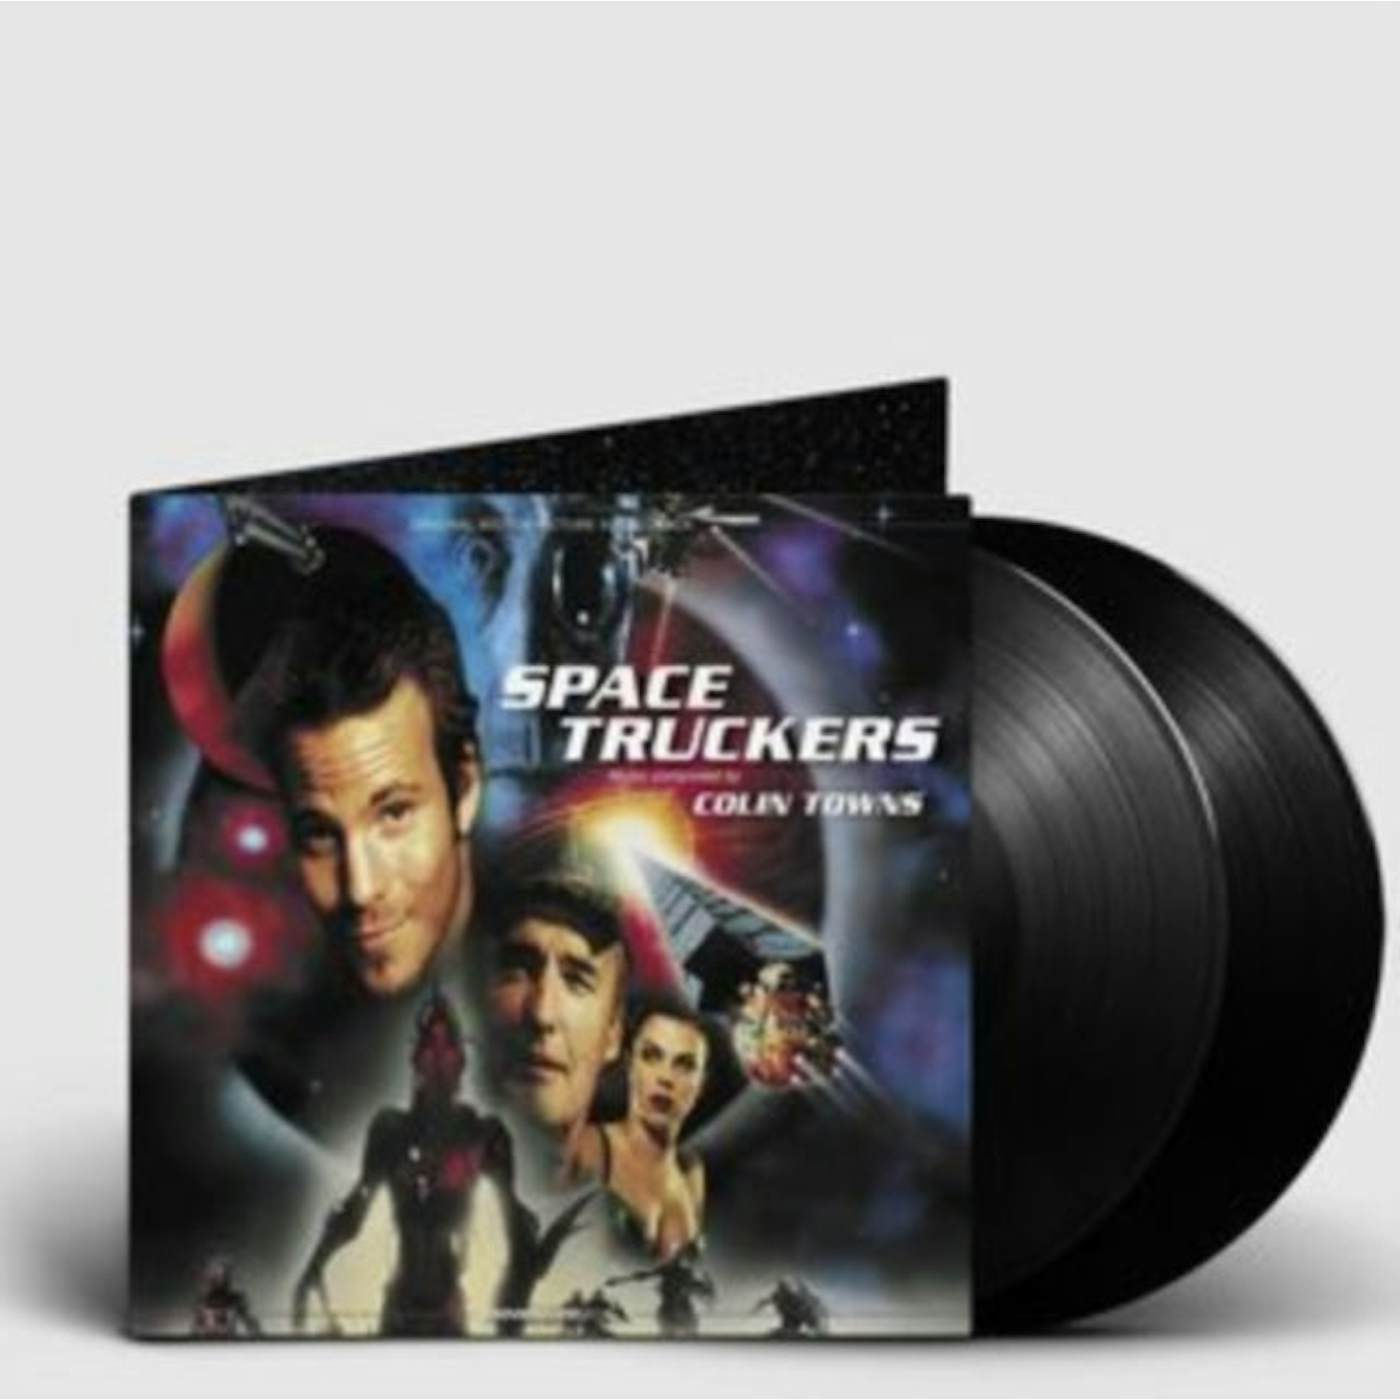 Colin Towns LP - Space Truckers (Vinyl)